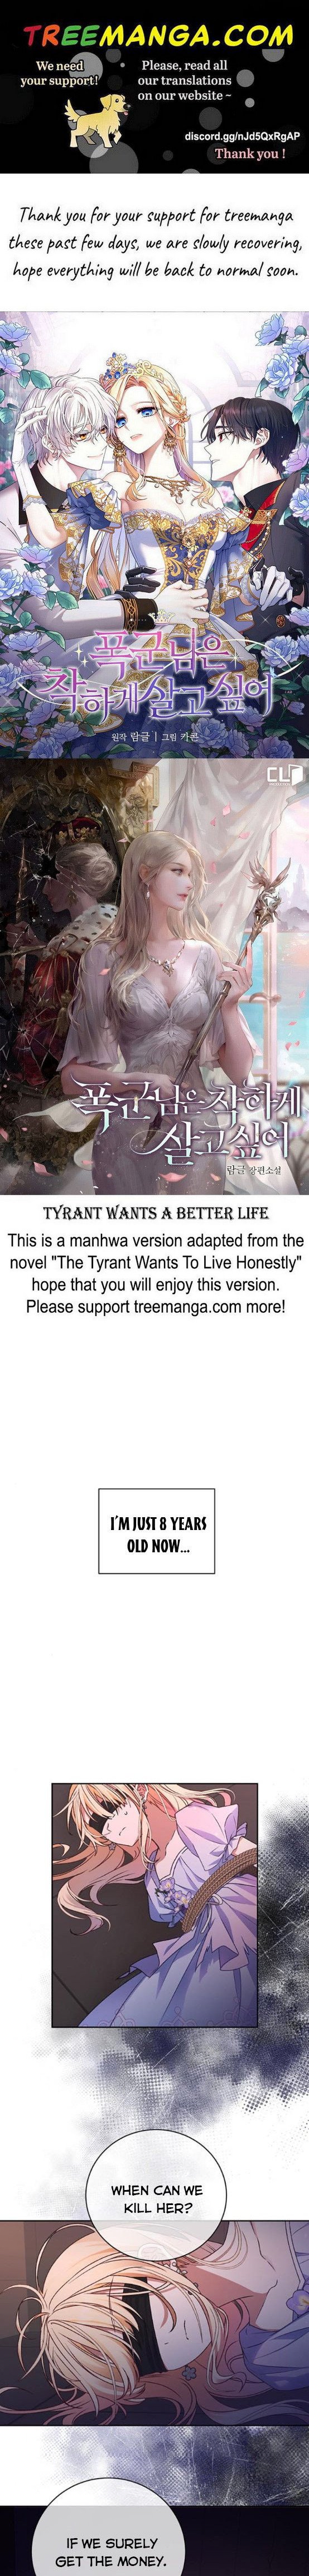 Tyrant wants a better life chapter 7